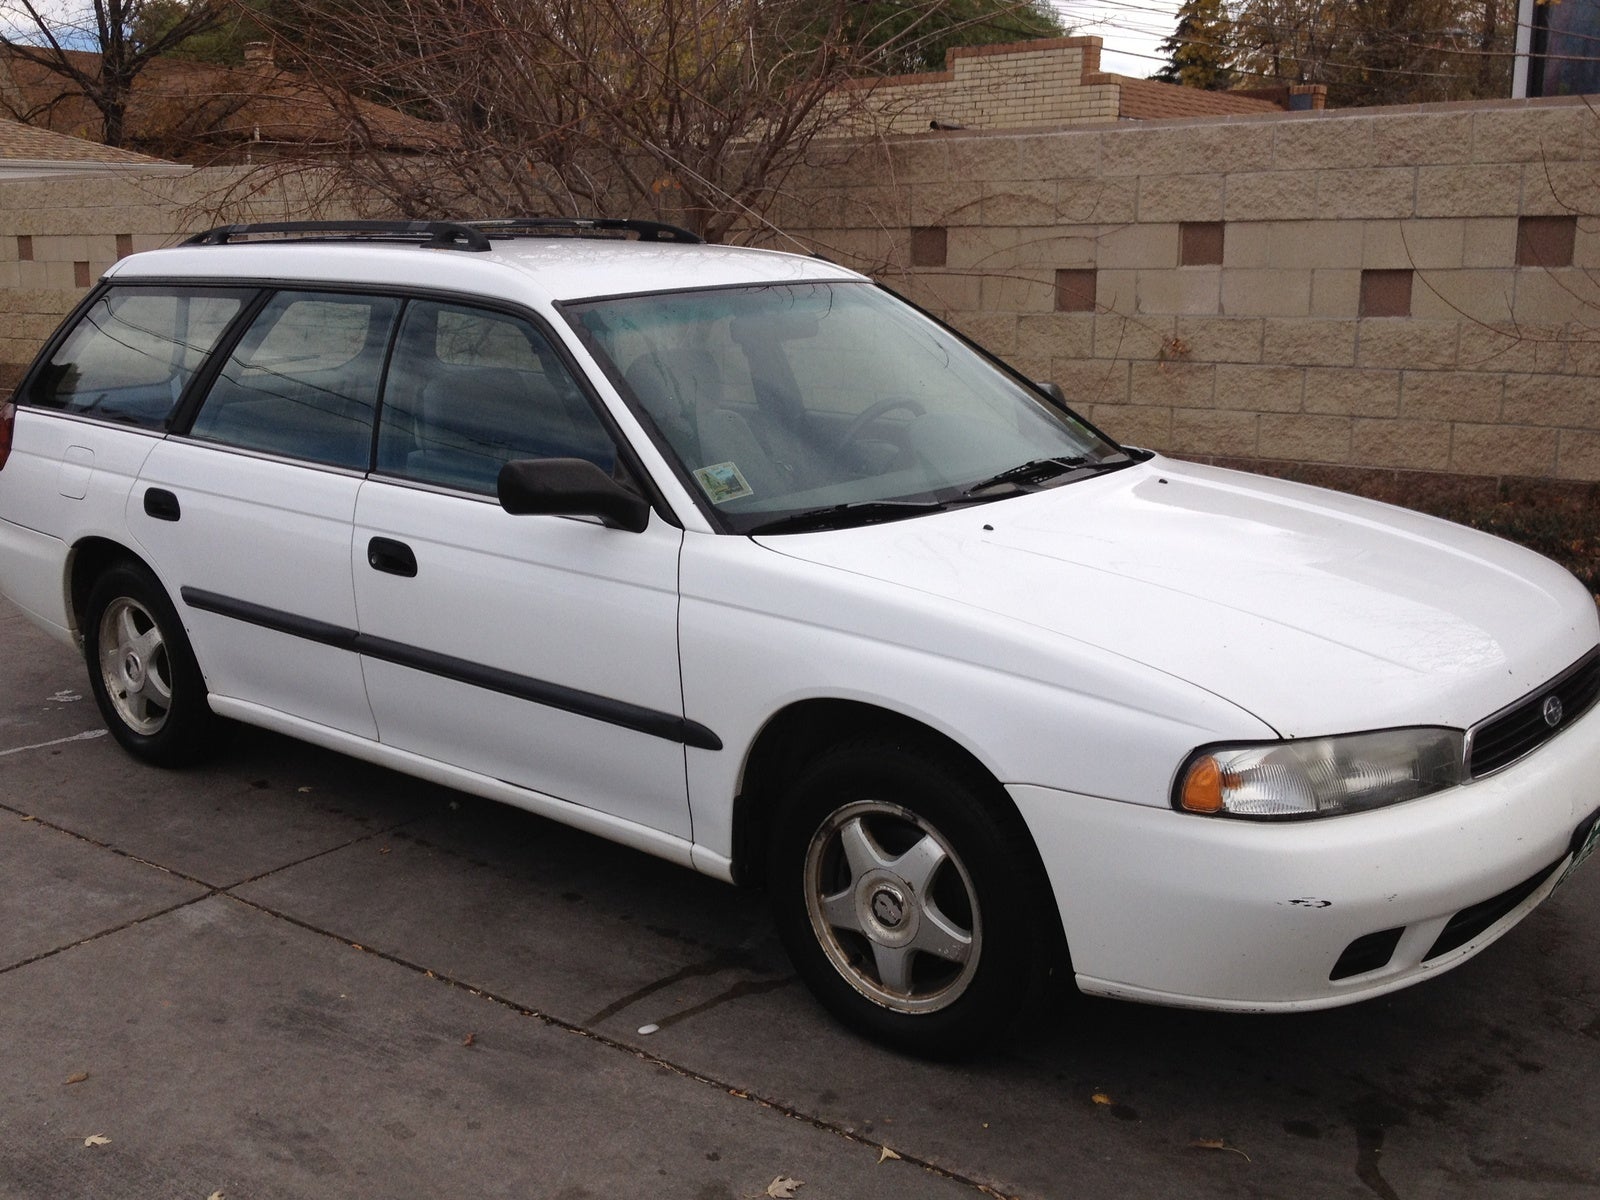 1997 Subaru Legacy L related infomation,specifications